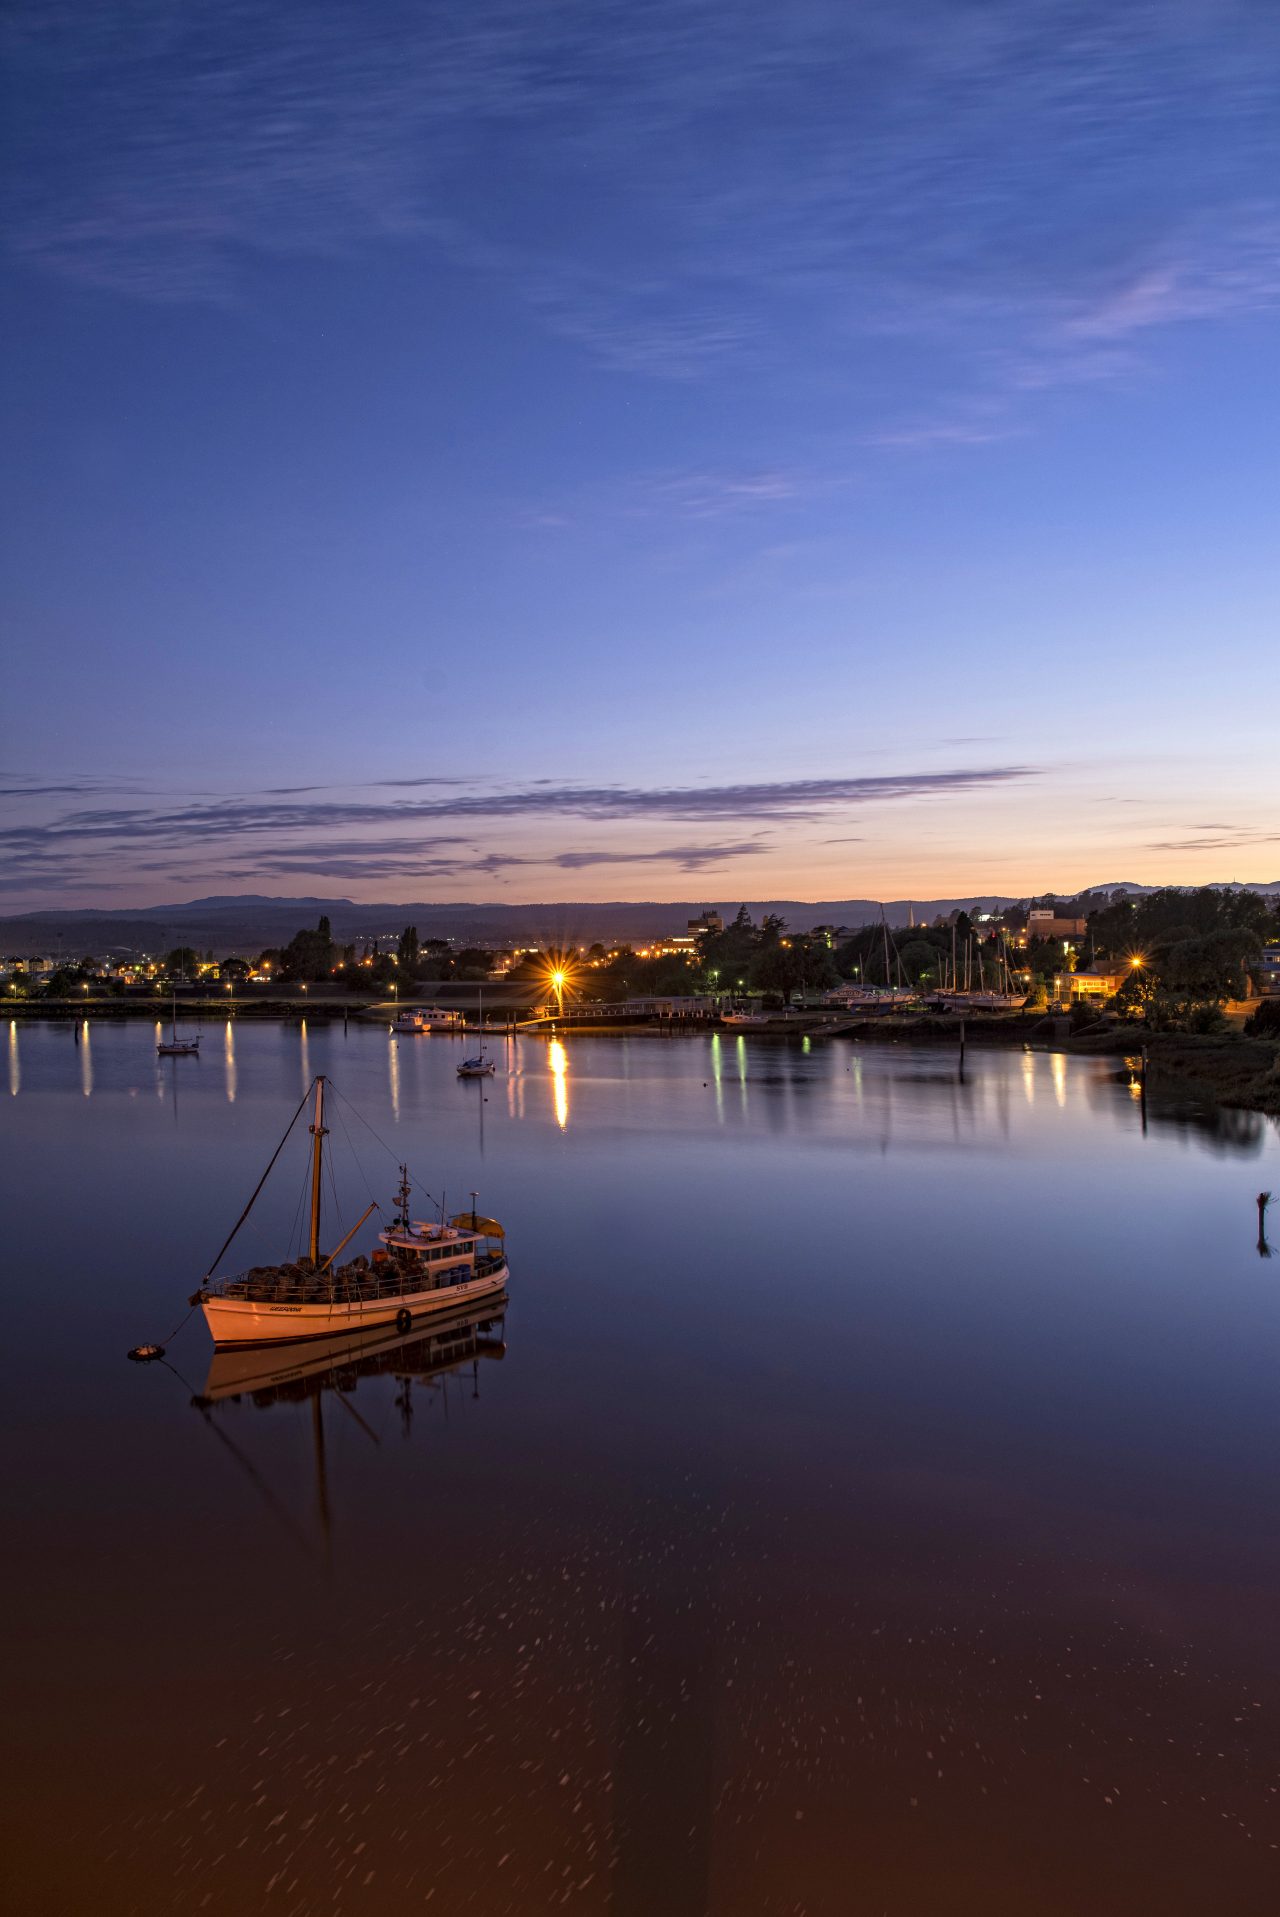 View of Launceston City at night time. a small boat in the forefront of the image.